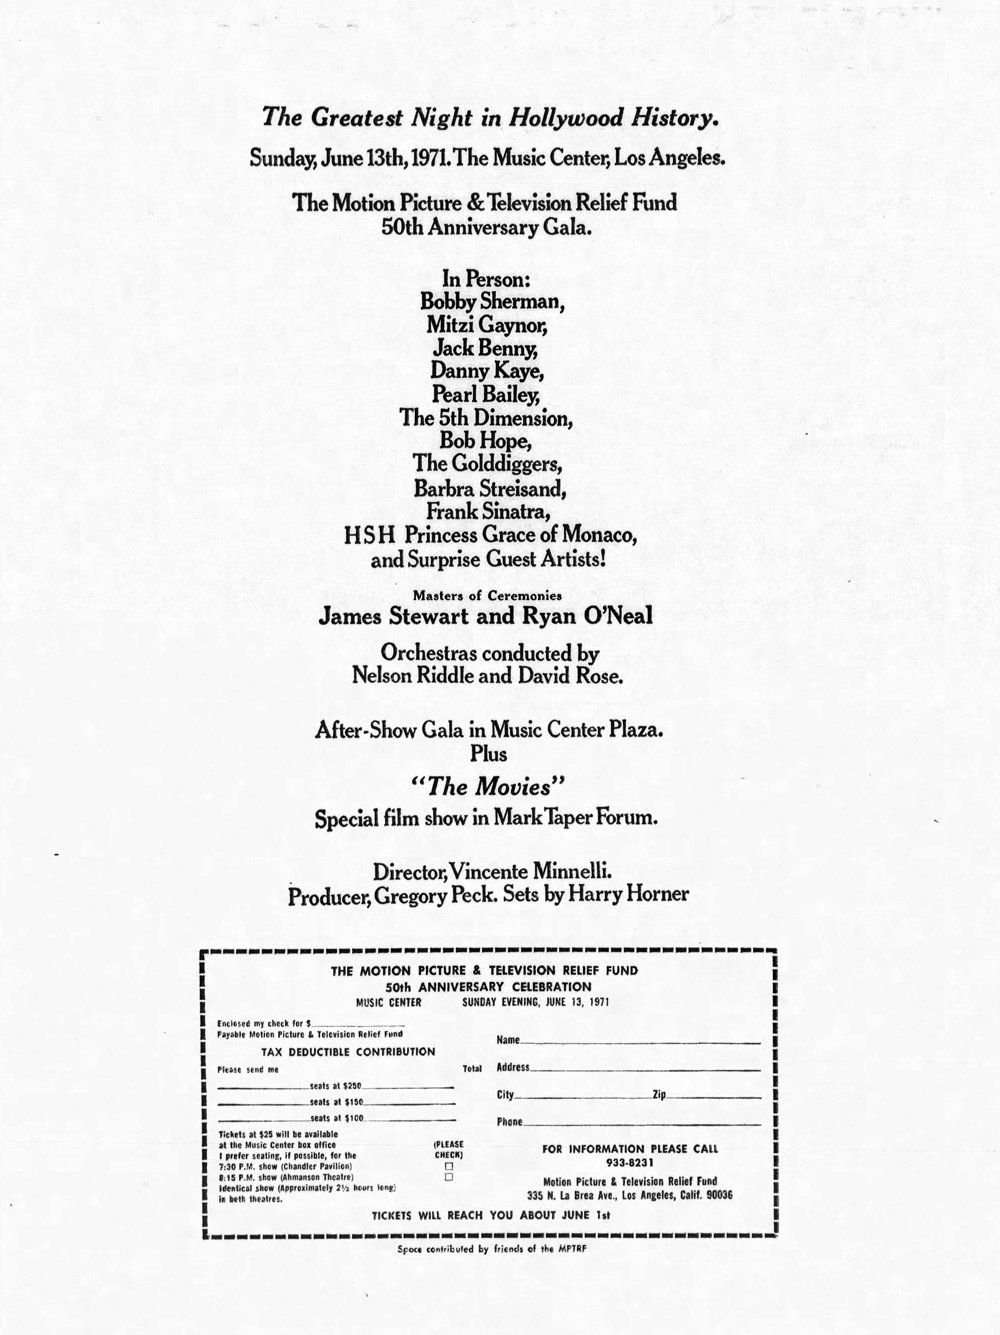 Newspaper ad for tickets to the Gala.